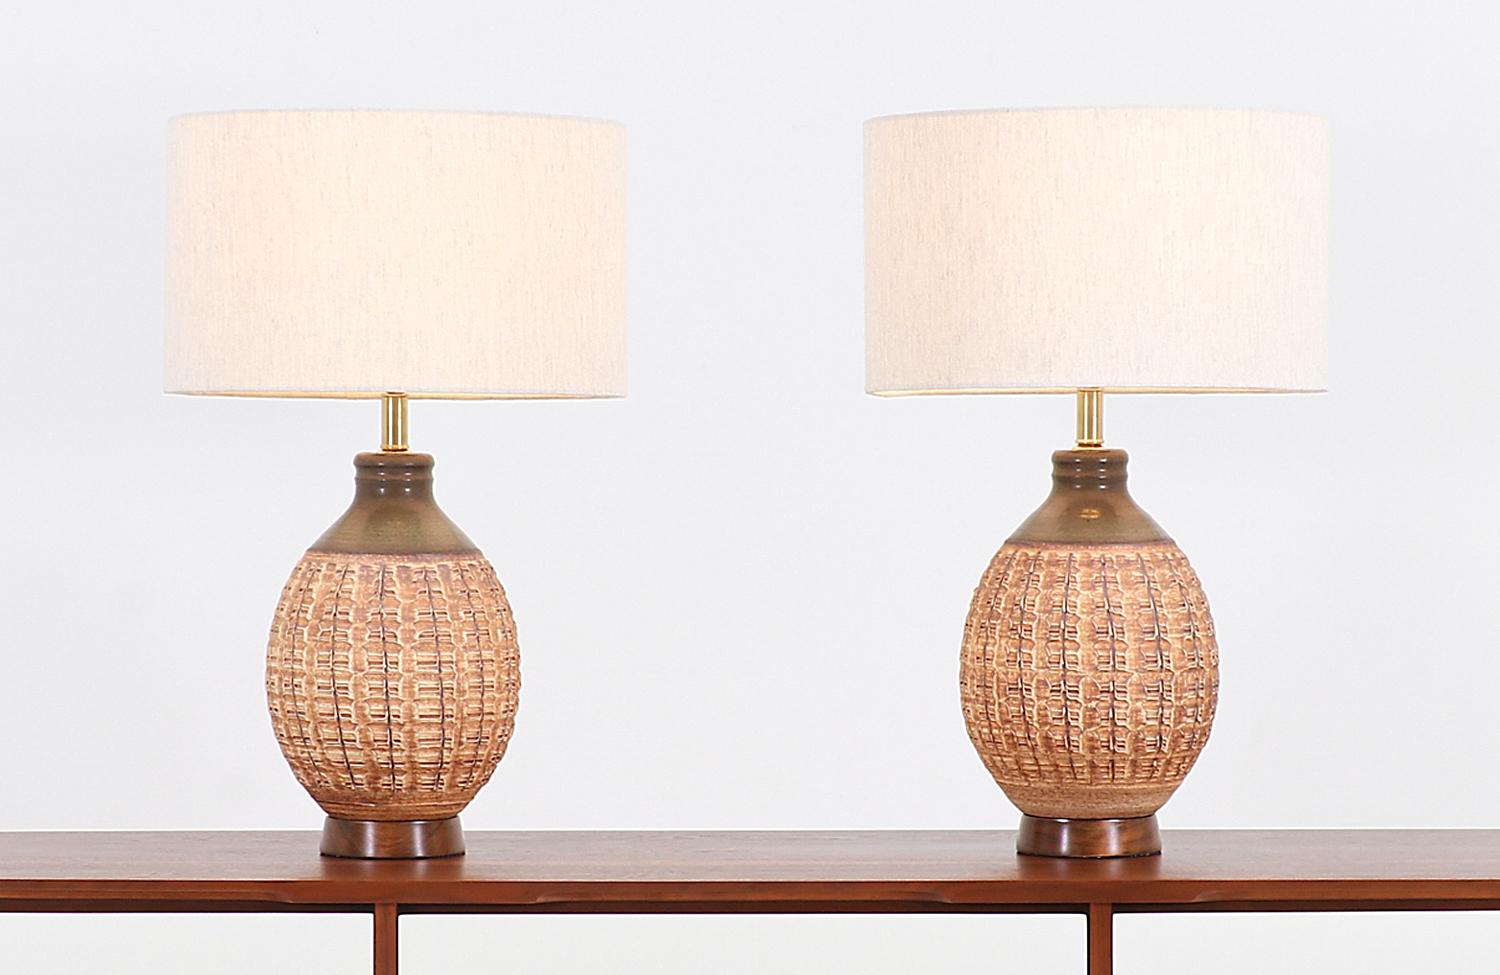 Pair of ceramic table lamps designed by Bob Kinzie for Affiliated Craftsmen in the United States, circa 1960s. These iconic N-series lamps showcase excellent craftsmanship on a rounded body with textured finish throughout. They feature warm colors,